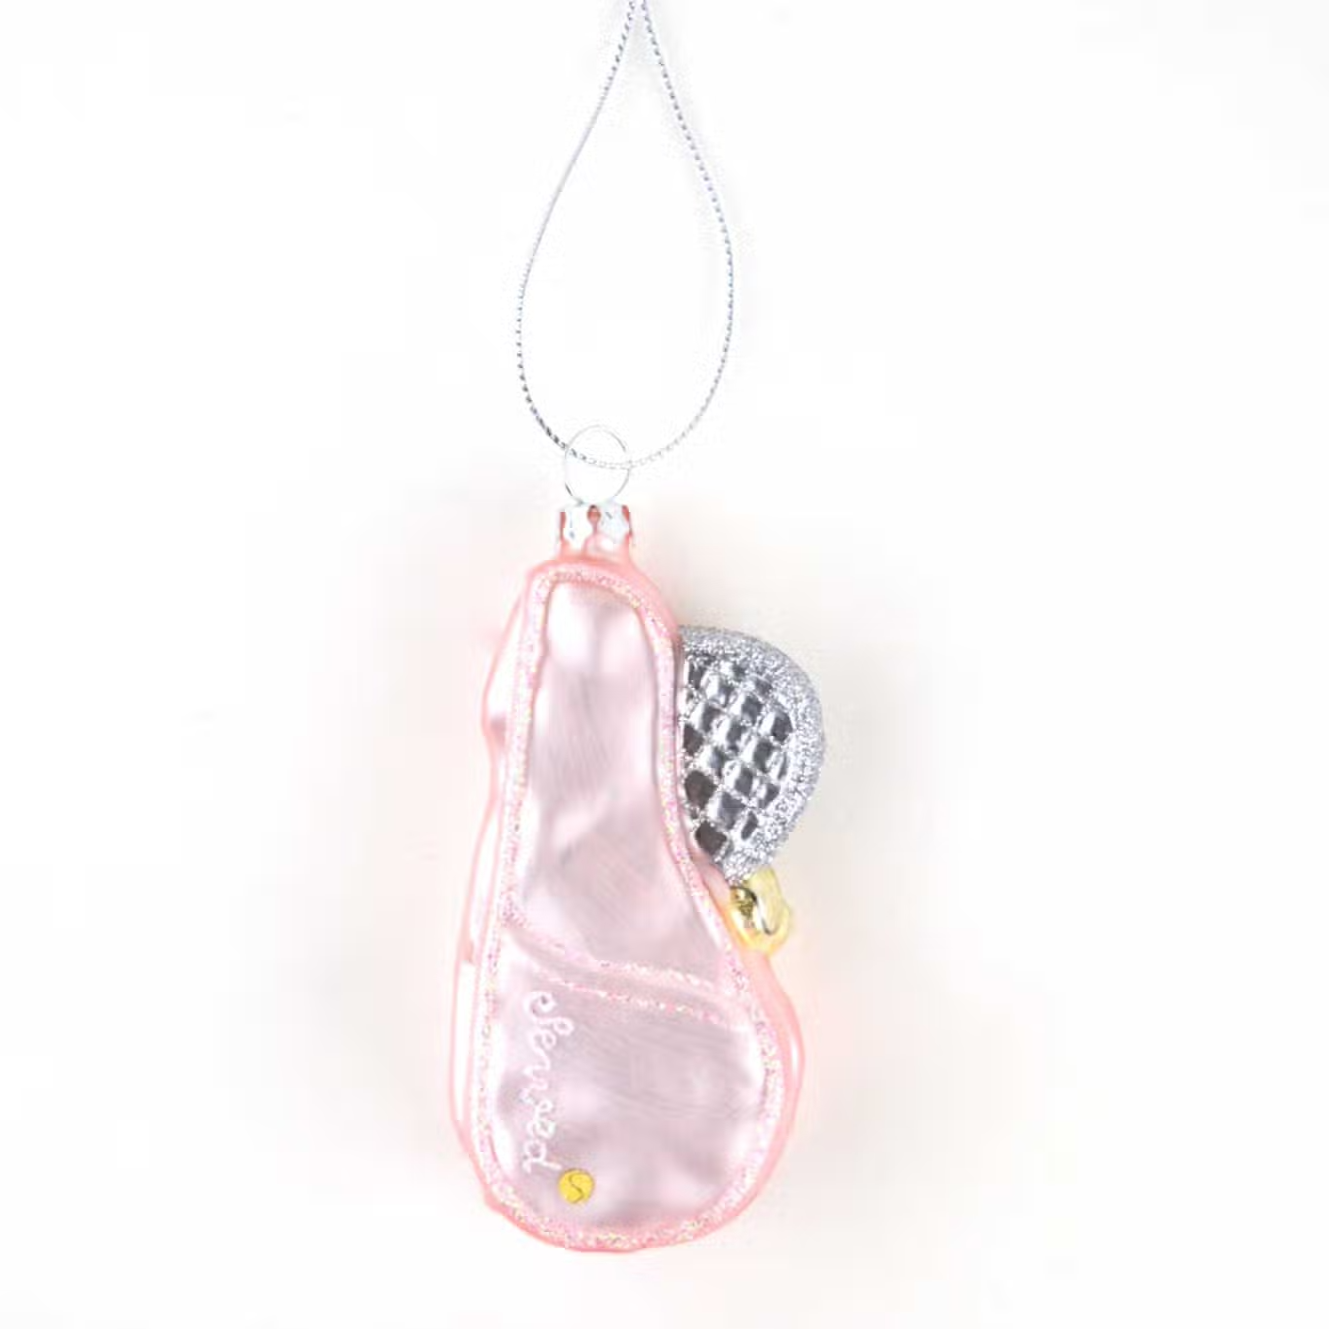 pink tennis racket bag shaped ornament with a silver and glittery racket sticking out of the bag. Ornament had silver string